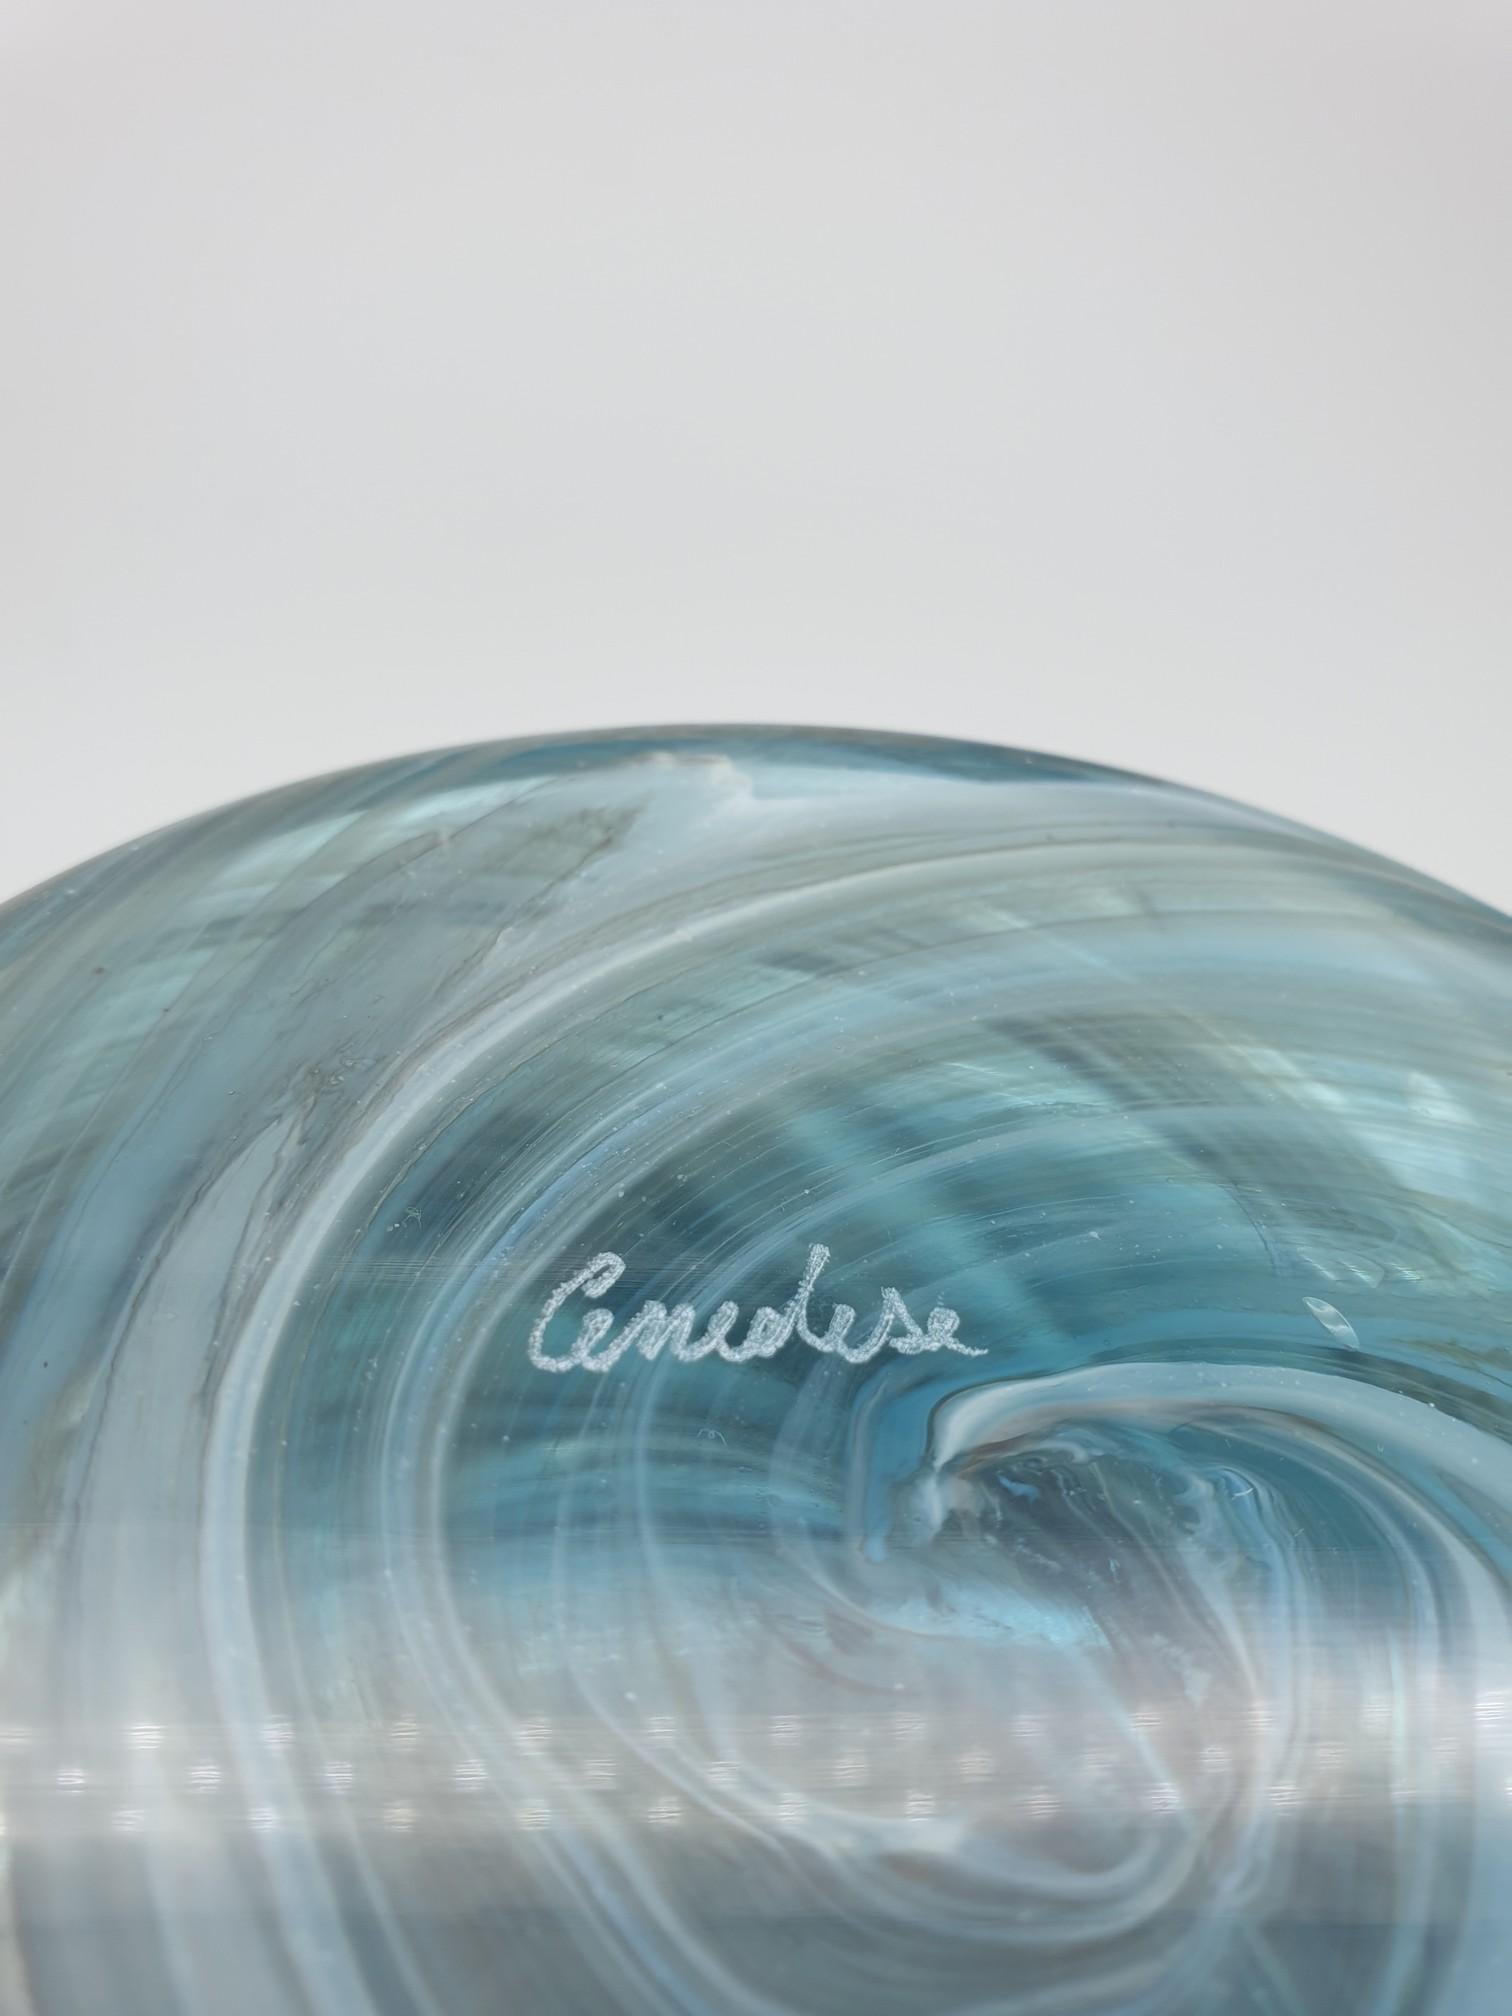 Modern Stylish Marbled Gray Murano Glass Vase by Cenedese, late 1990s For Sale 8